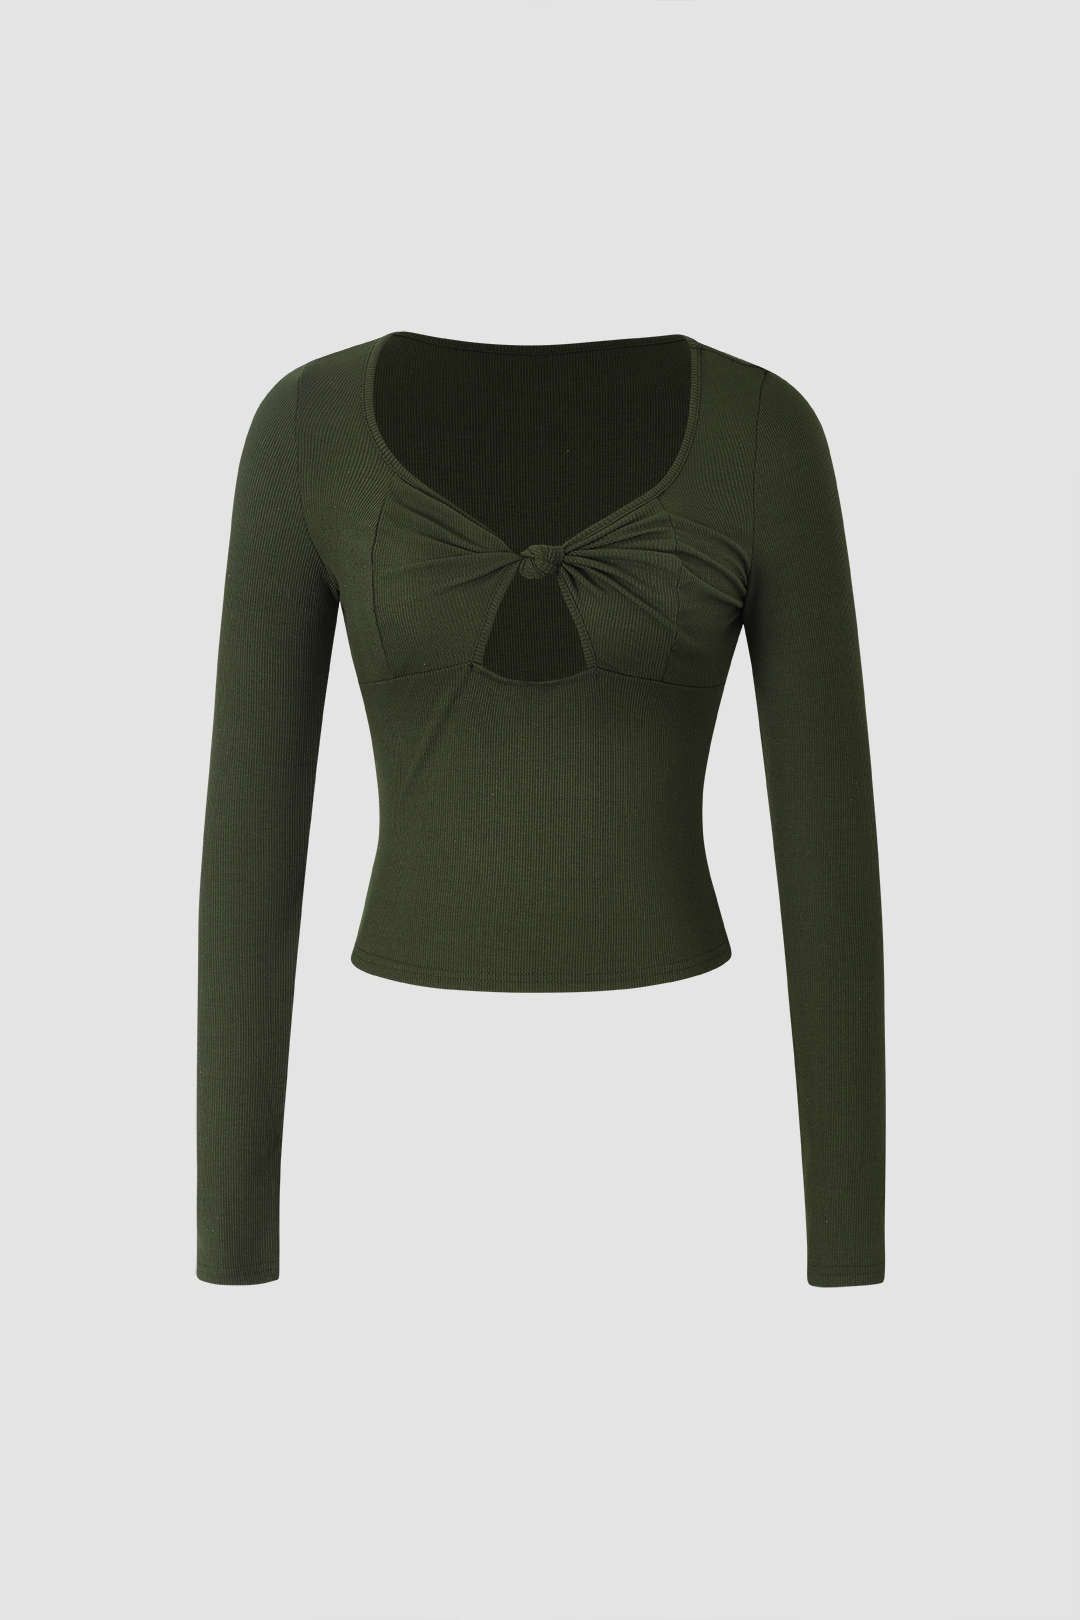 Knot Detail Cut Out Long Sleeve Top